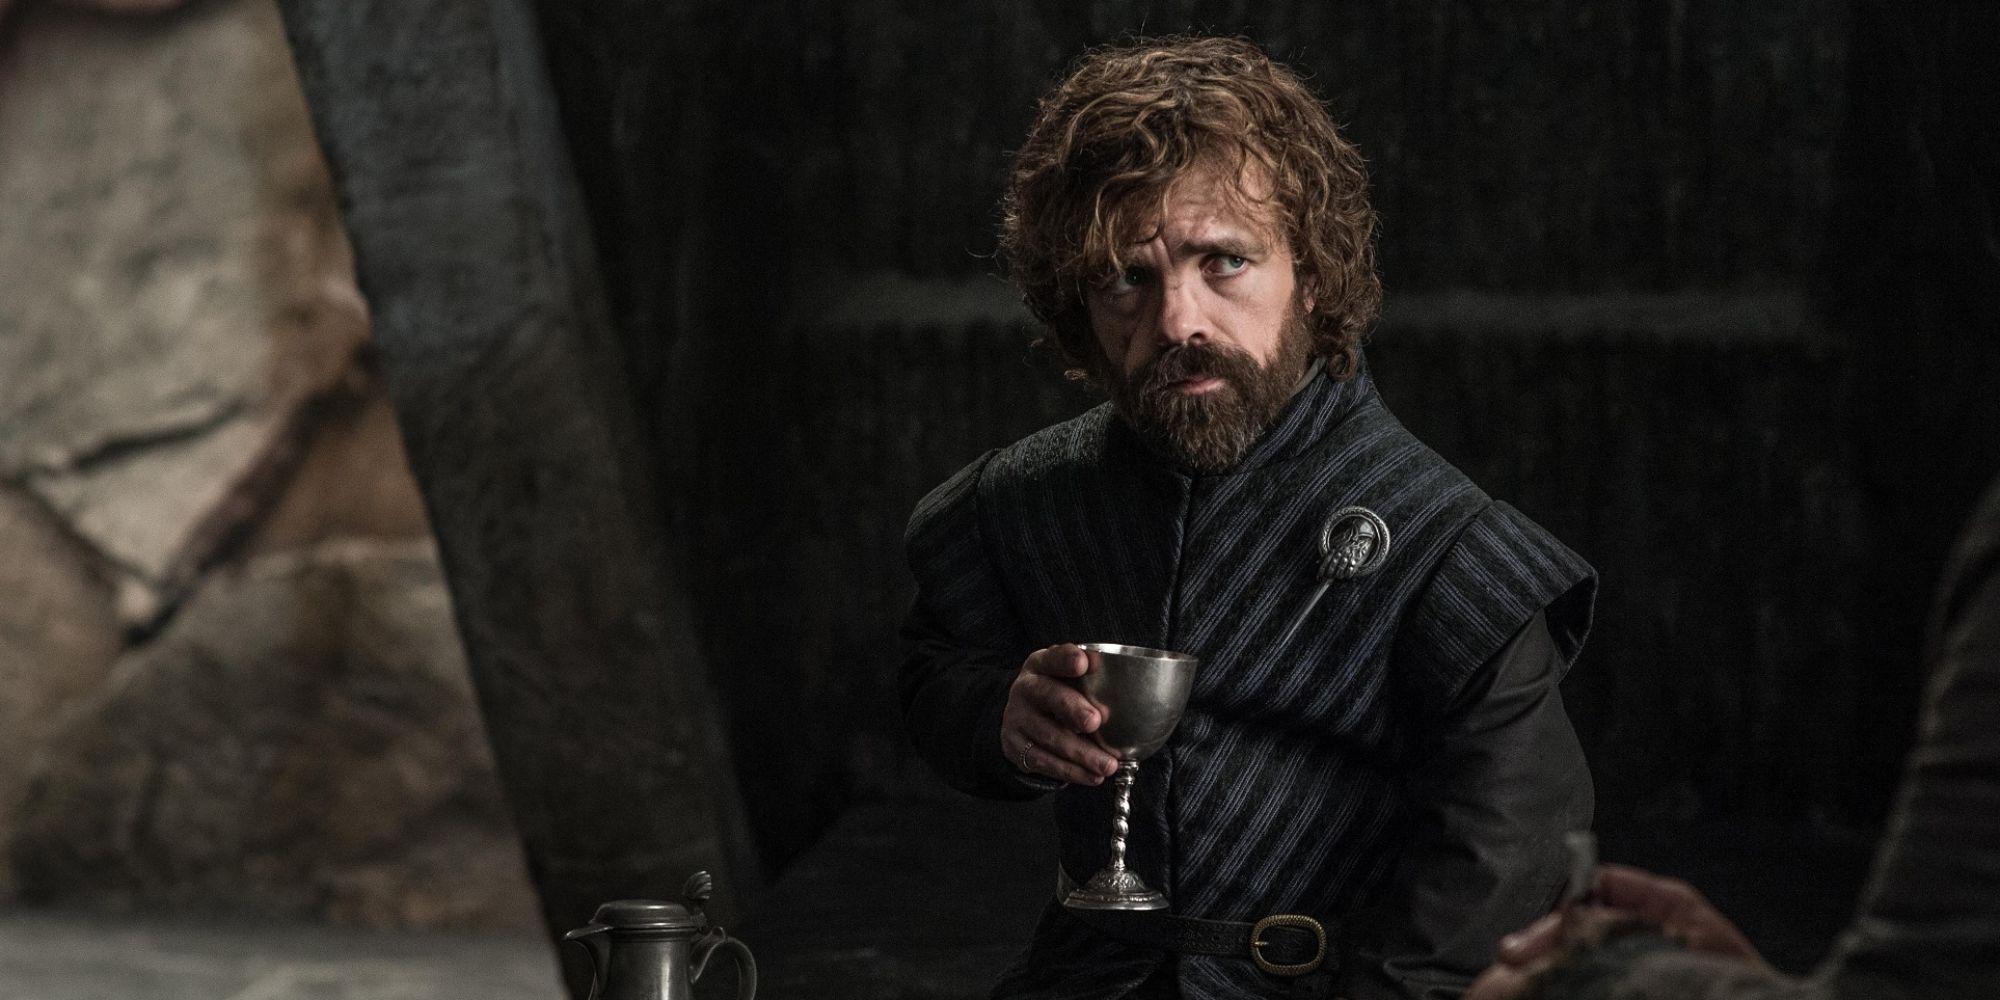 Peter Dinklage as Tyrion Lannister sitting down and drinkin from a goblet in Game of Thrones.